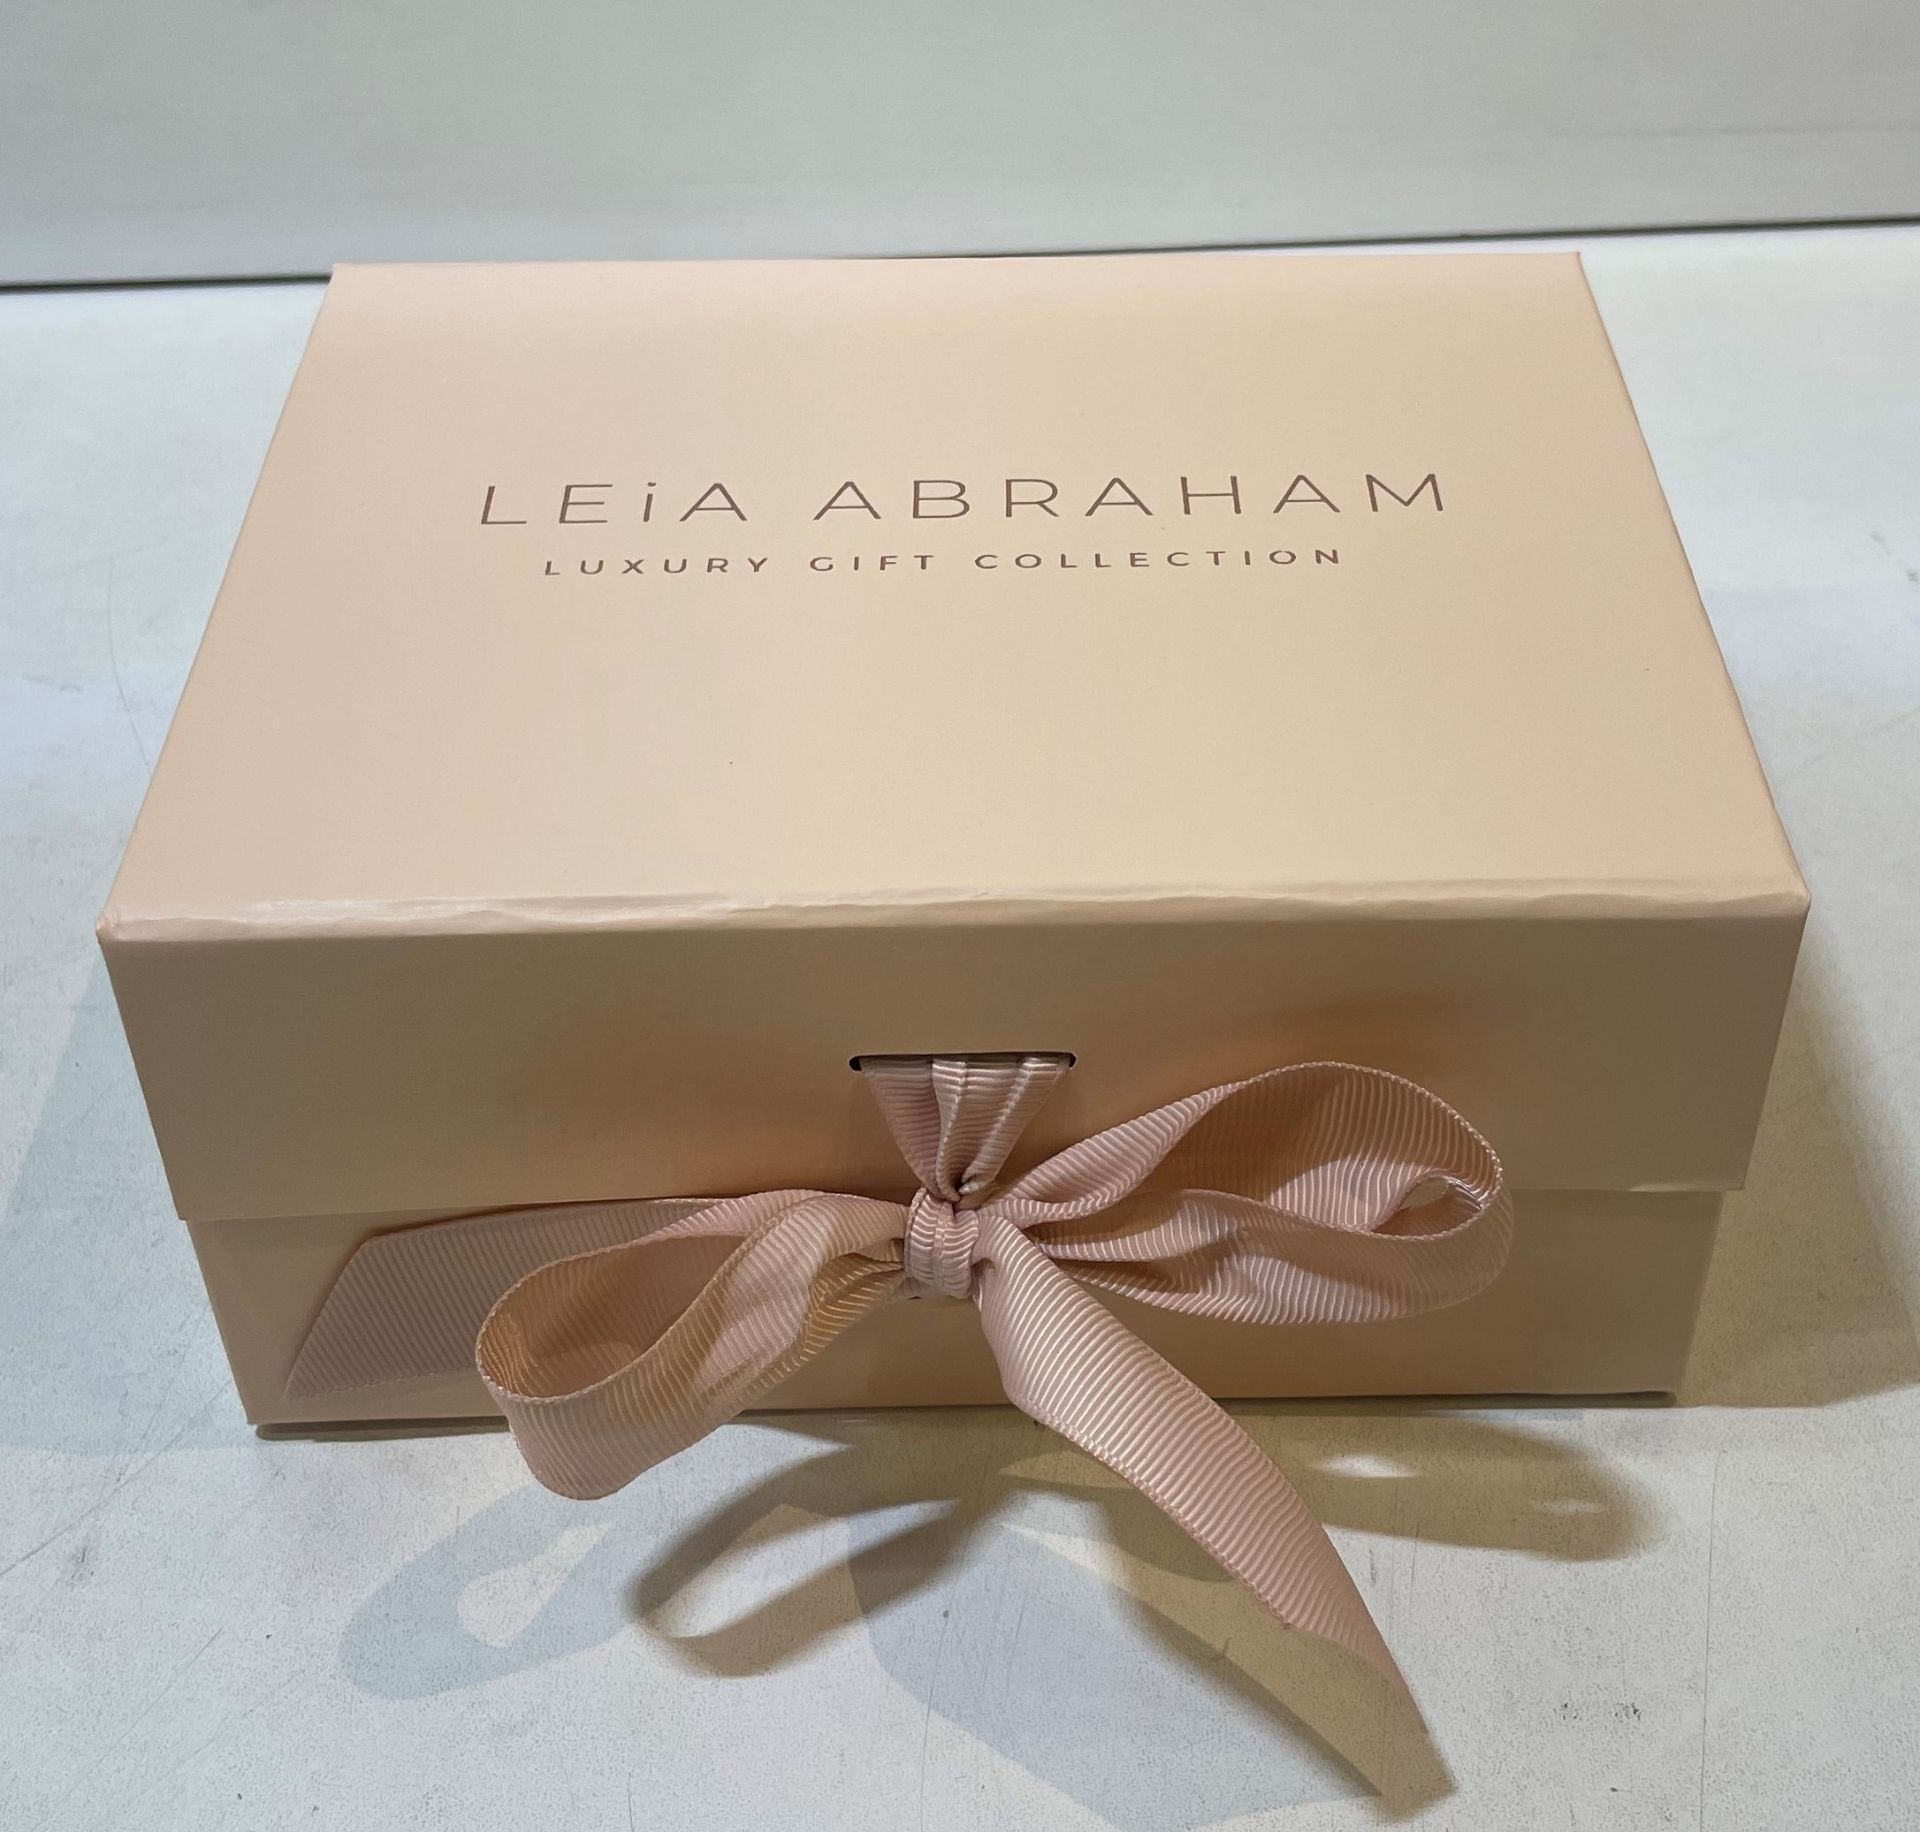 Gift Boxes for Her | 3 Sizes Small, Medium, Large | For Quantities and Contents see Description - Image 35 of 36